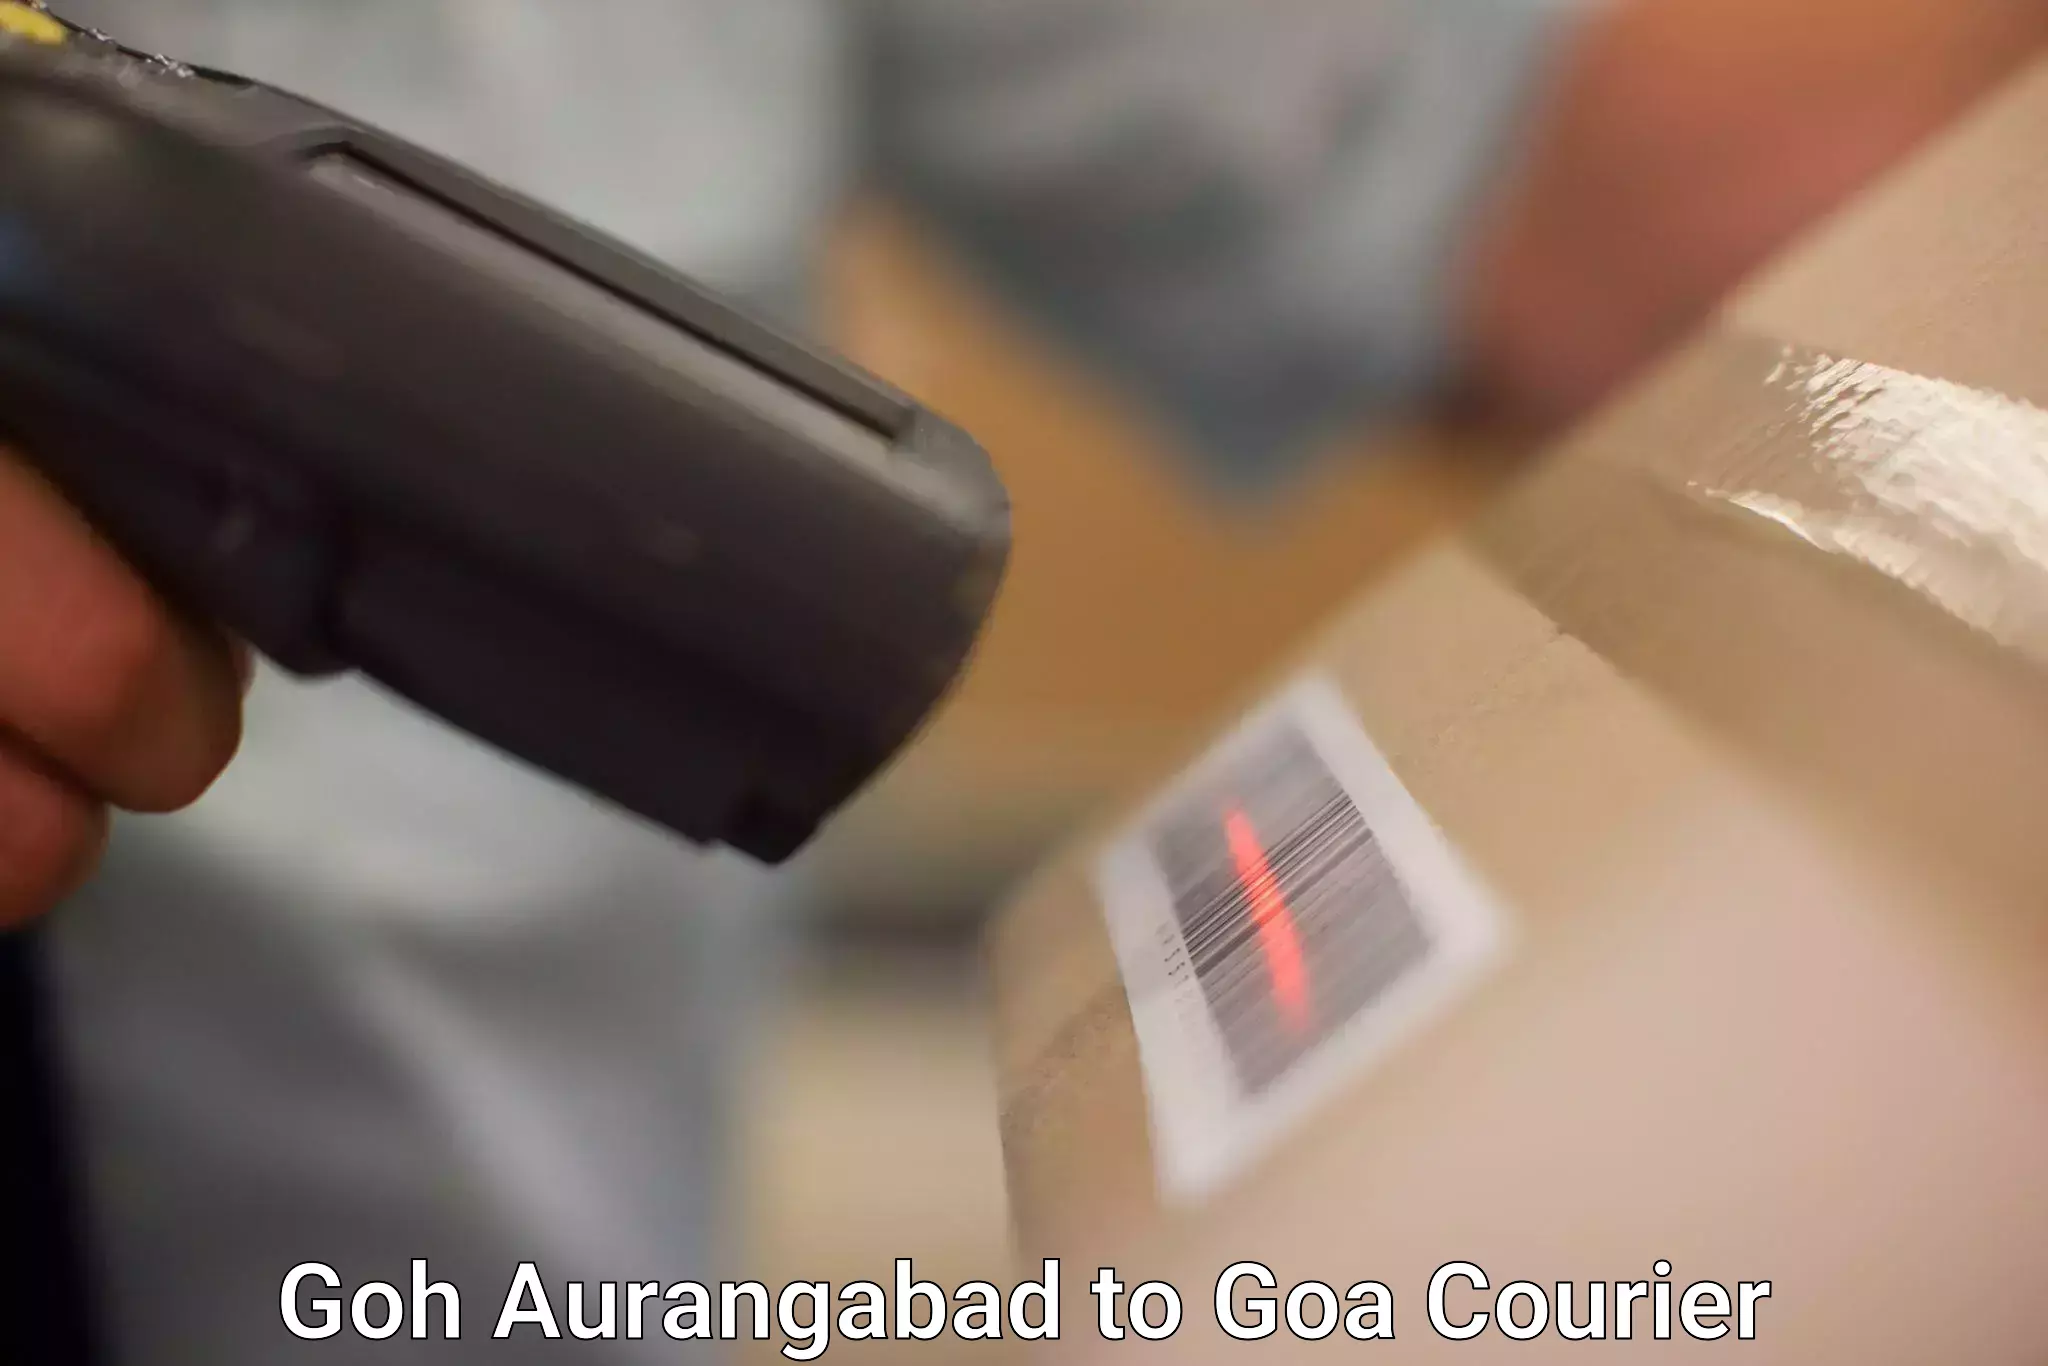 Flexible delivery schedules Goh Aurangabad to South Goa